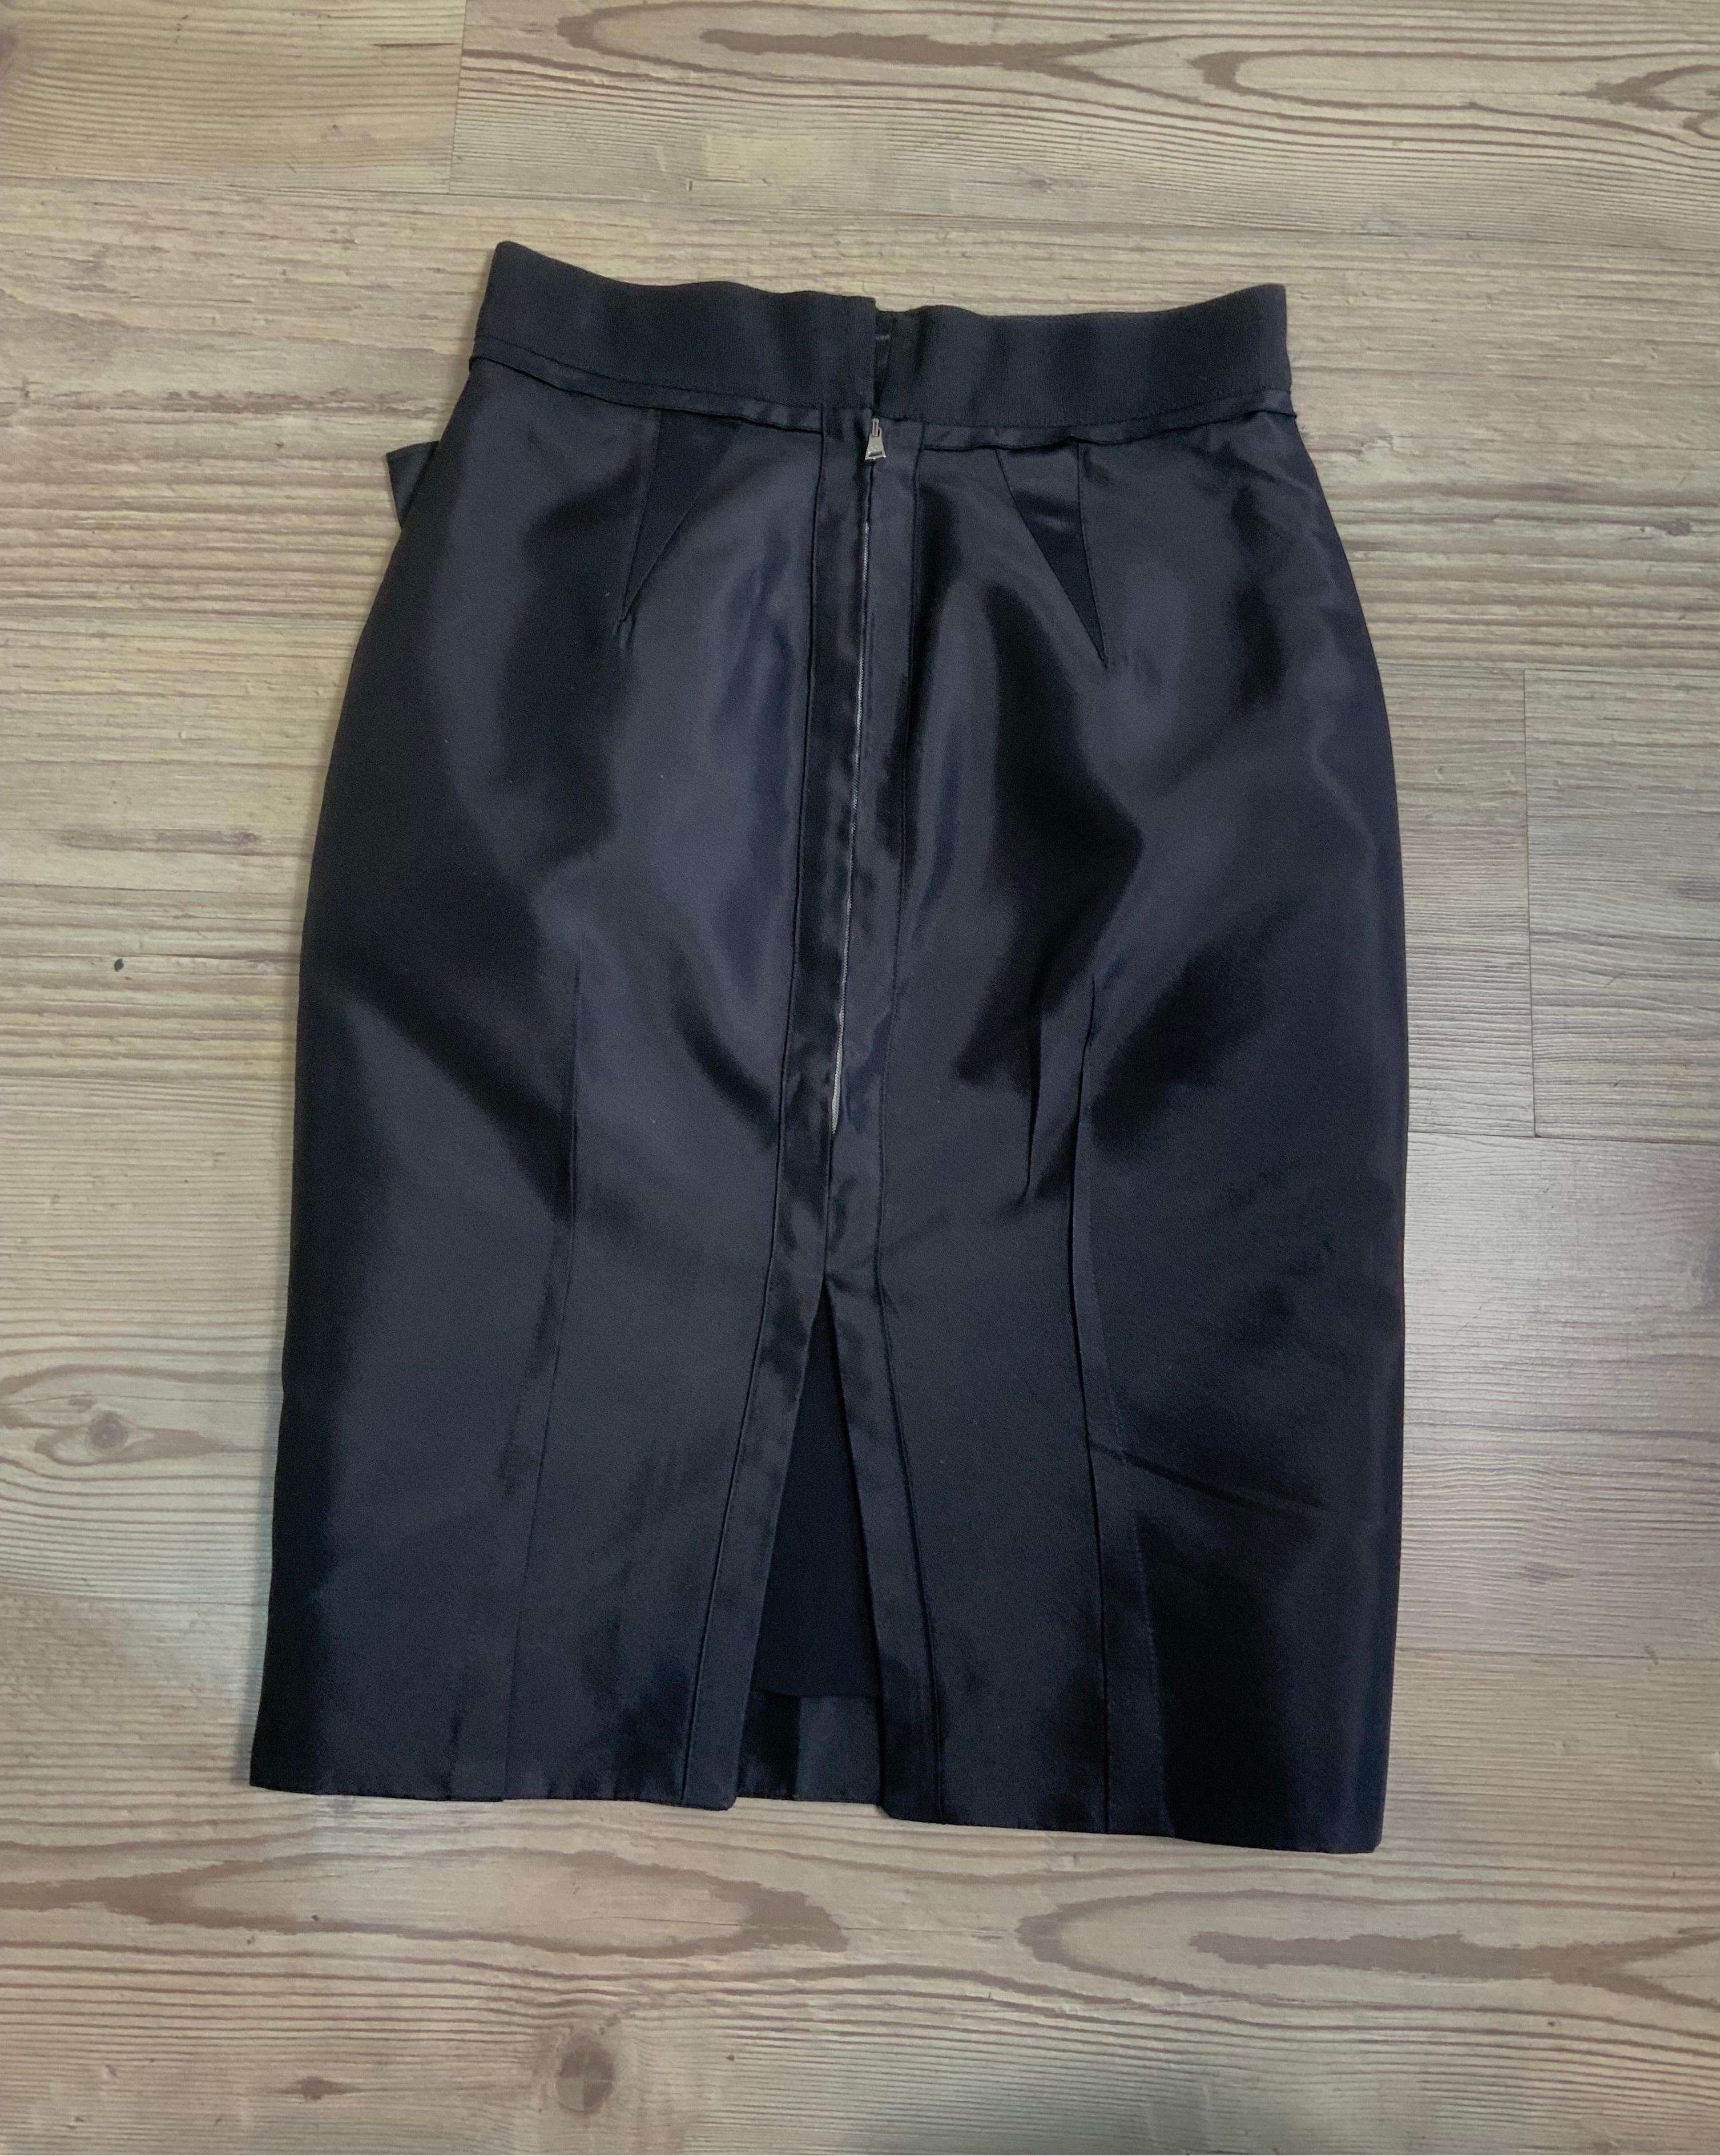 Dolce and Gabbana Black Skirt + jacket Suit For Sale 5